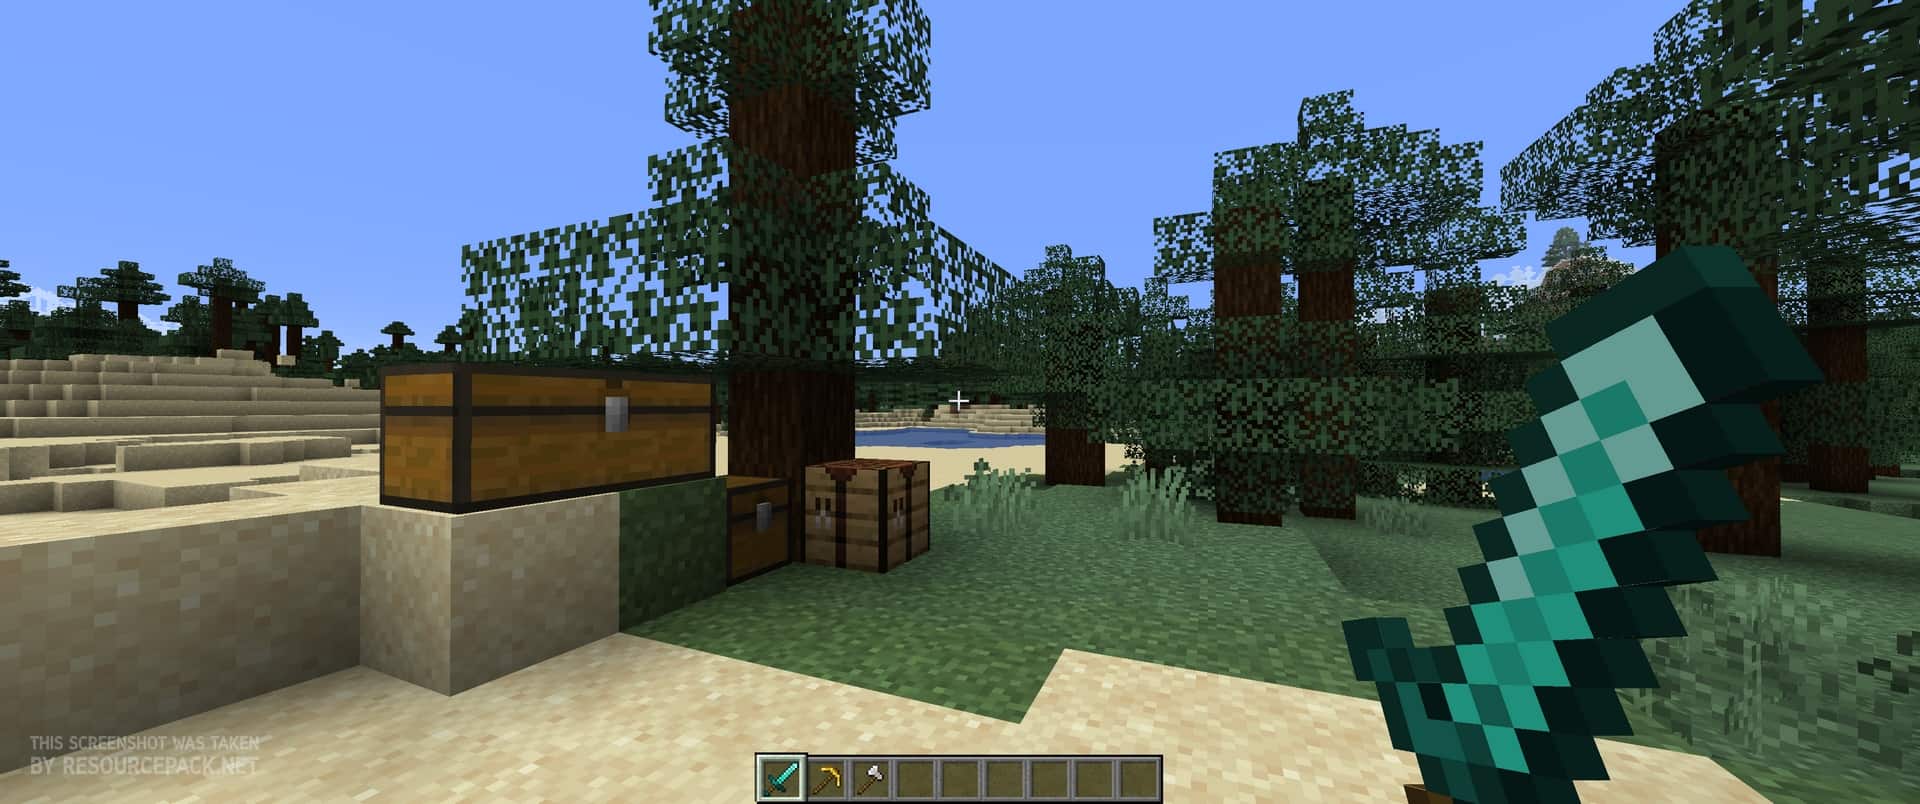 Moving Blocks Texture Pack 1.20, 1.20.4 → 1.19.4 - Download